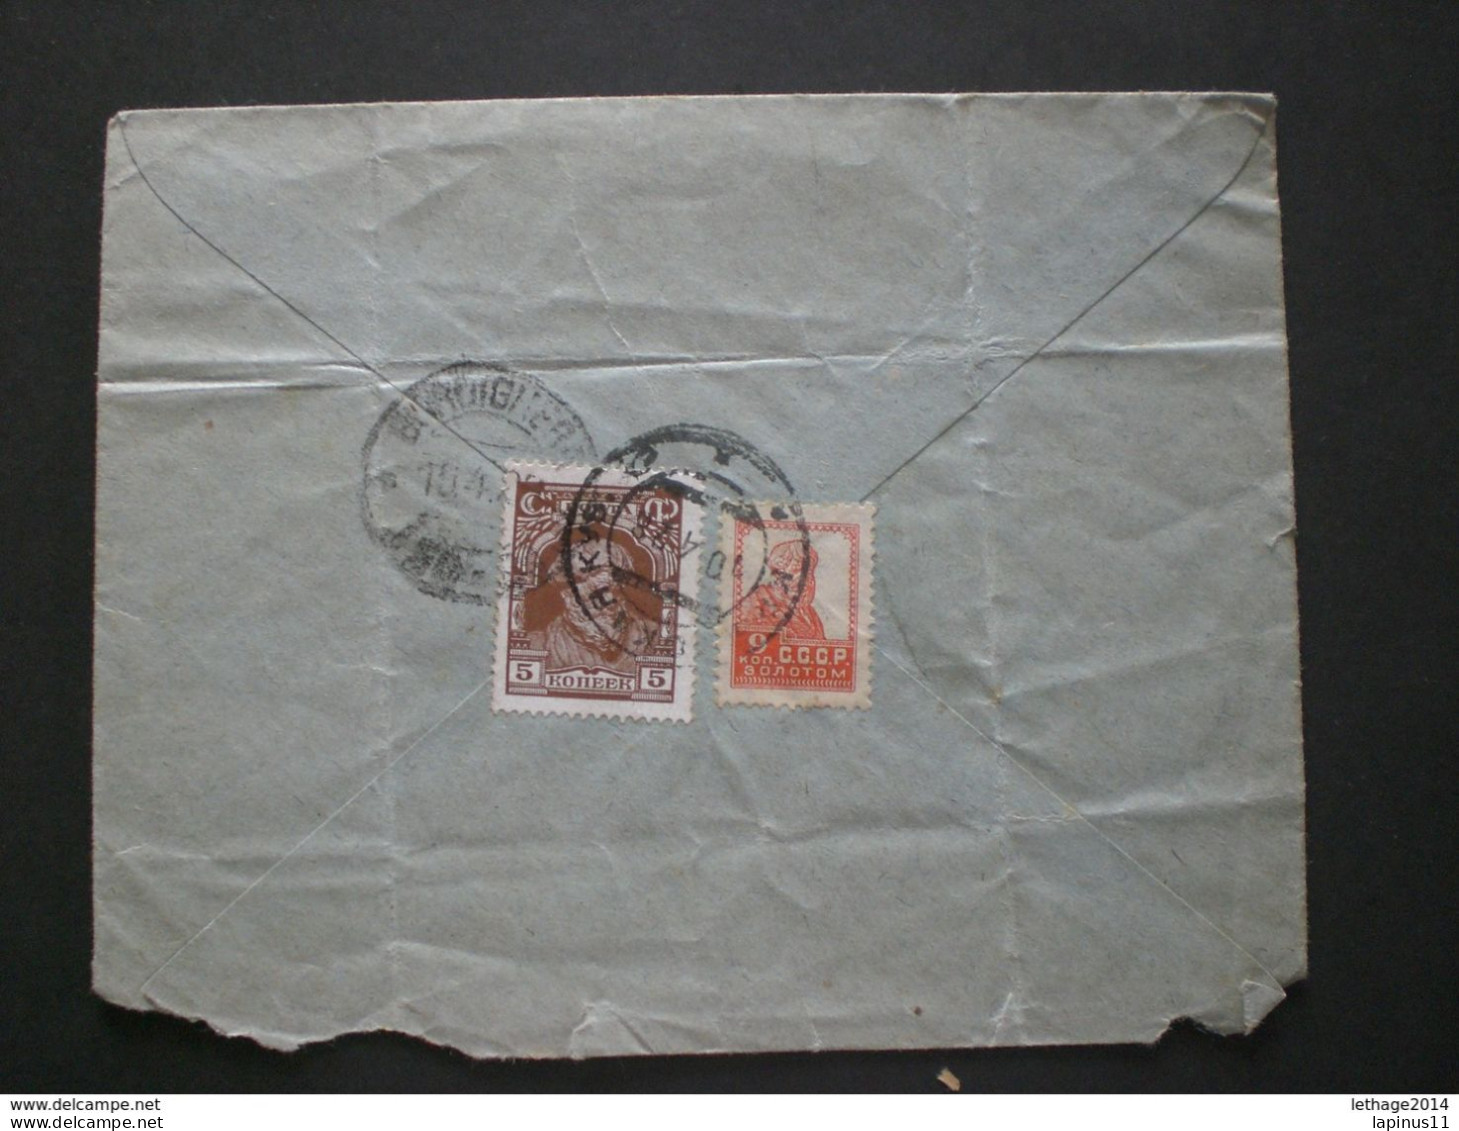 RUSSIA RUSSIE РОССИЯ STAMPS COVER 1928 RUSSLAND TO ITALY RRR RIF. TAGG (175) - Brieven En Documenten